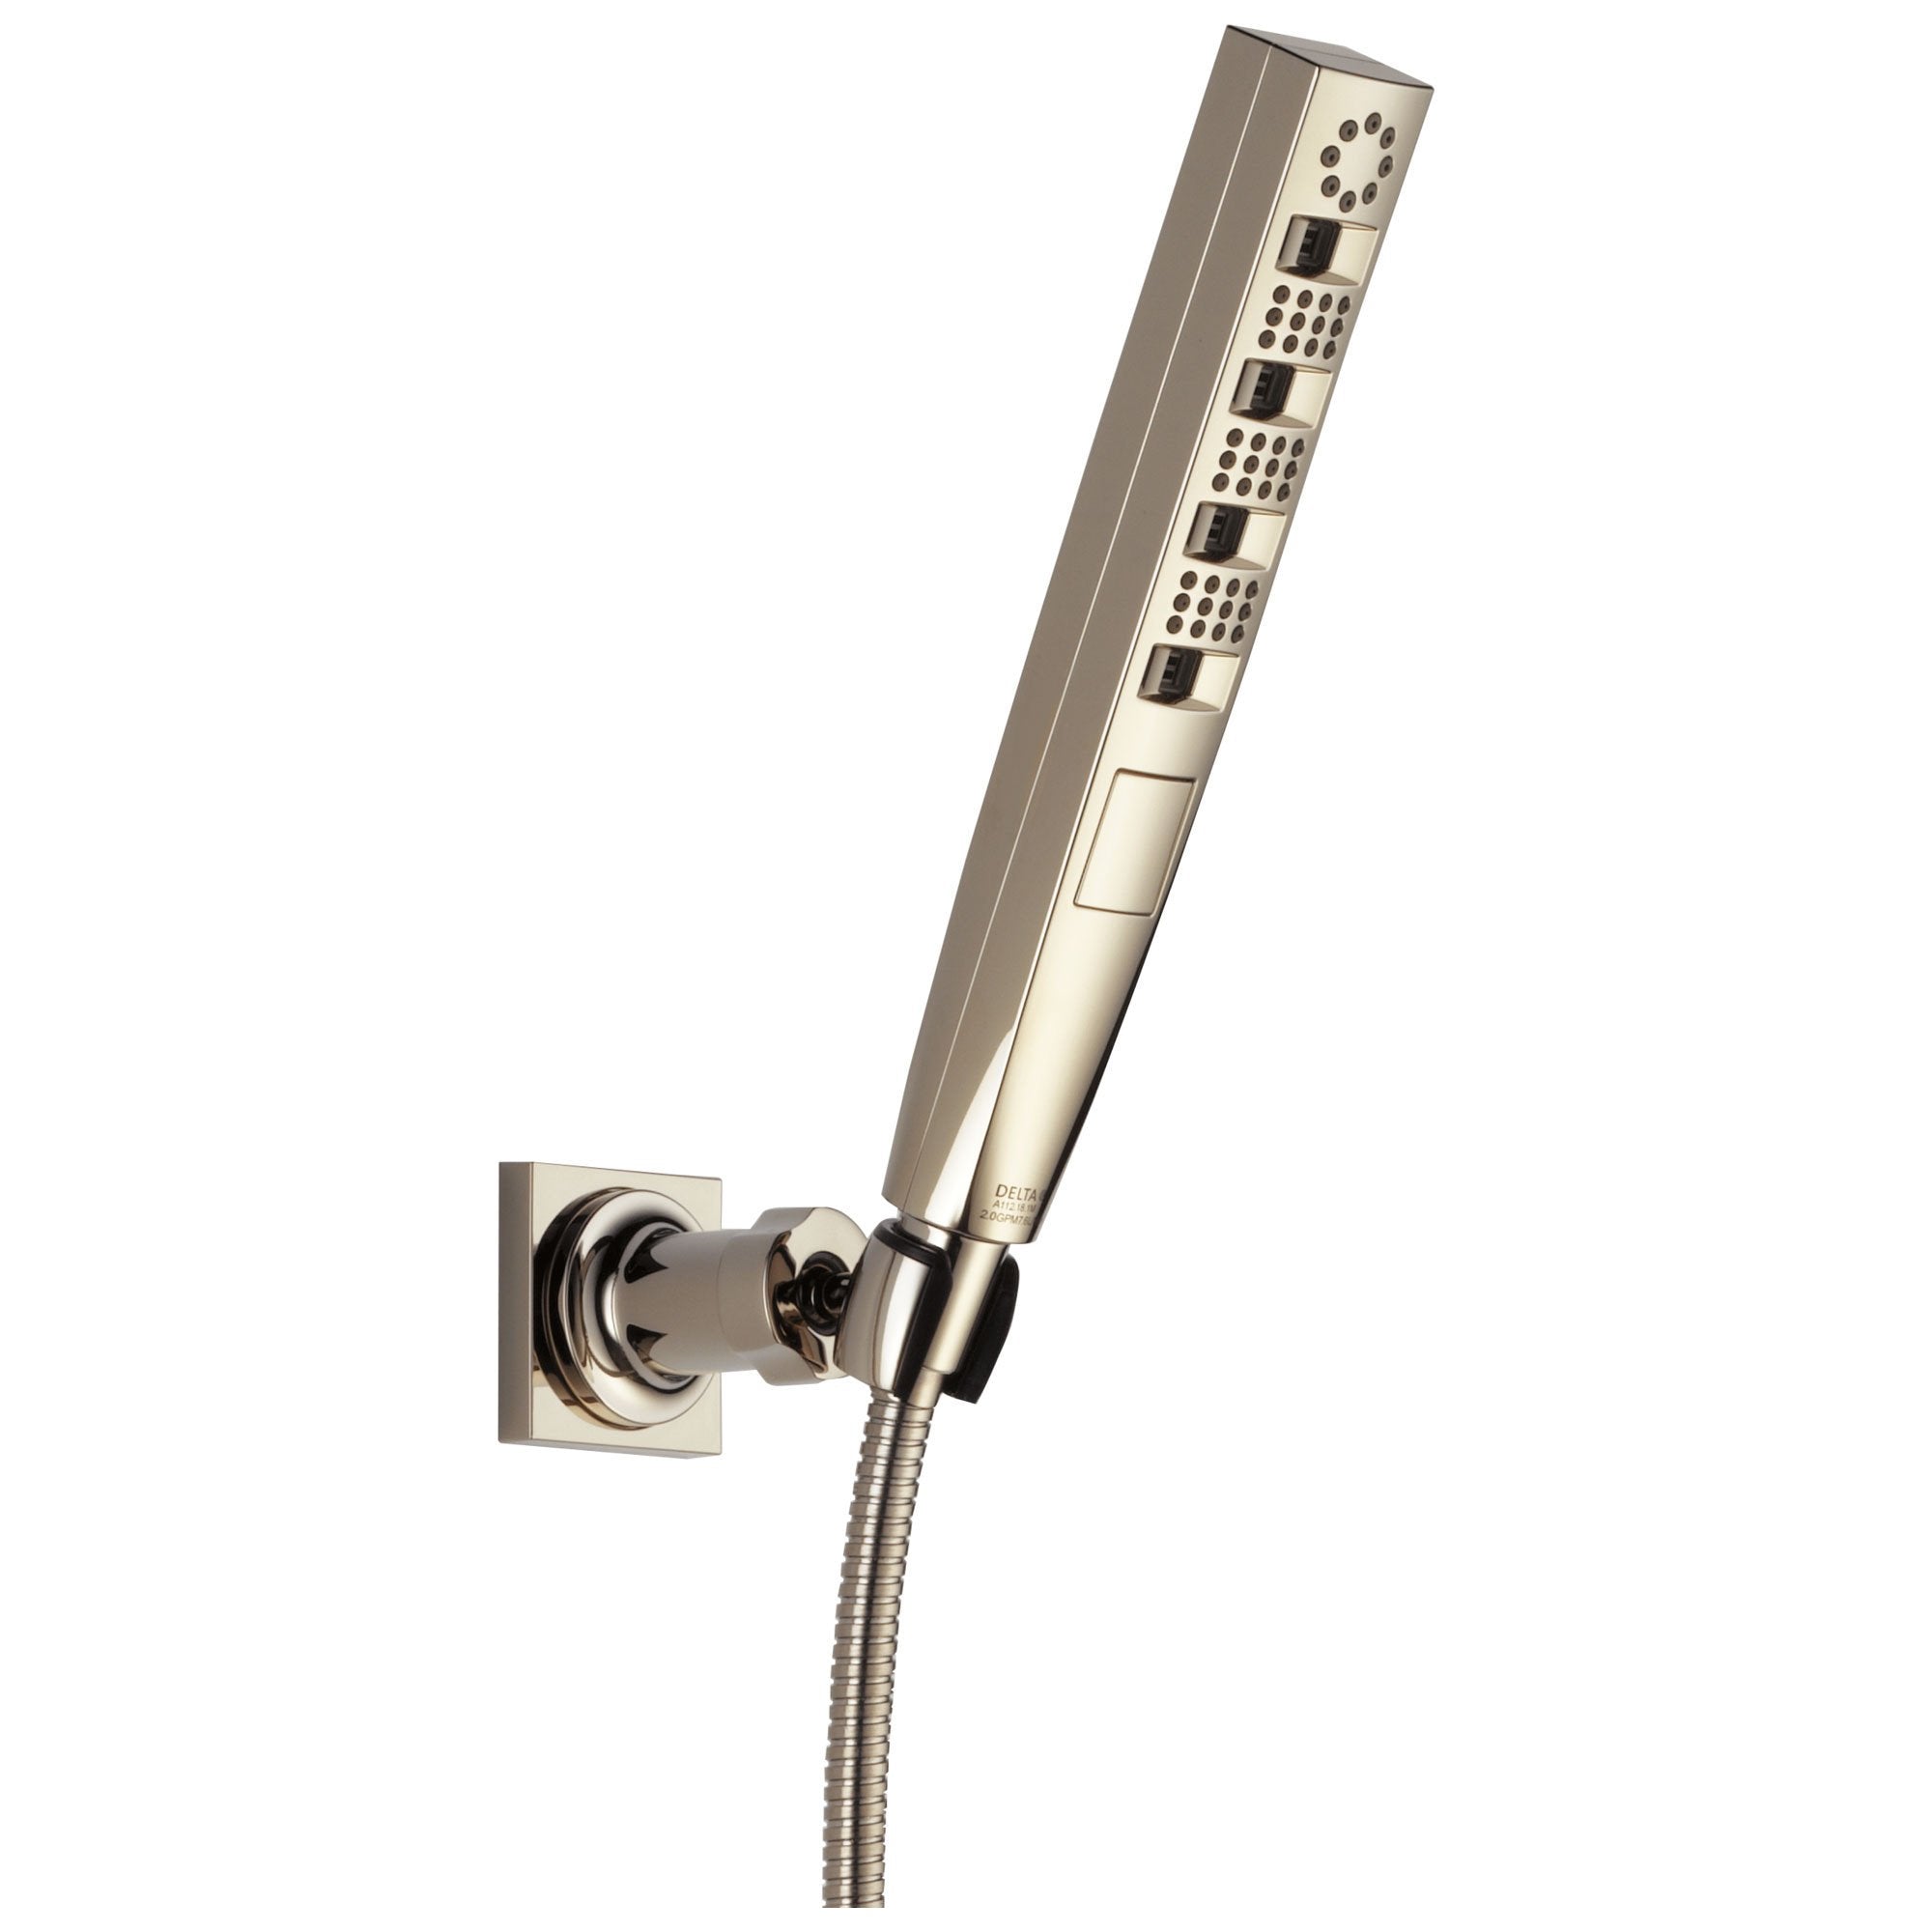 Delta Universal Showering Components Collection Polished Nickel Finish Zura Modern Multi-Function Hand Shower with Wall Mount Bracket and Hose 743915